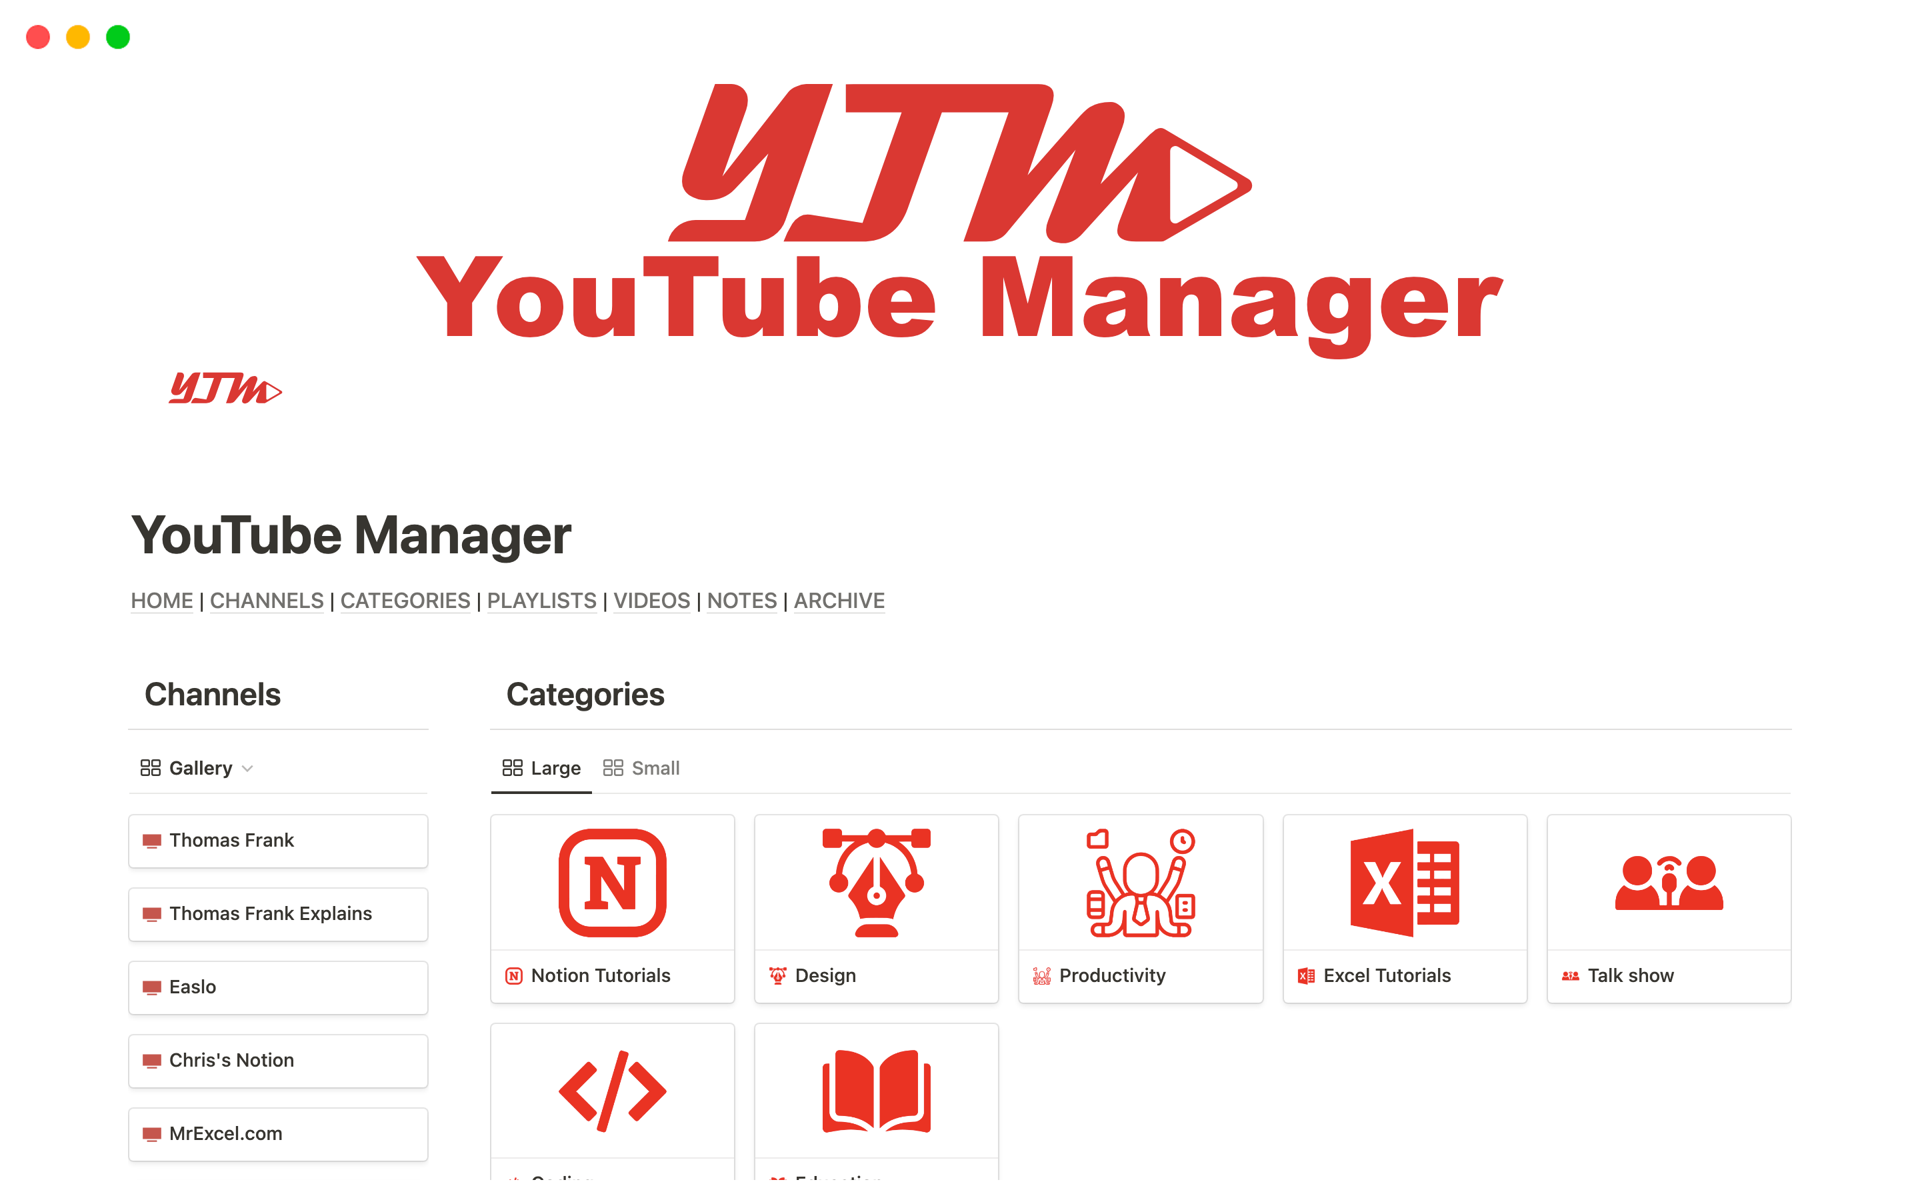 This free template is designed for managers who struggle to find specific YouTube channels, have difficulty organizing their channels into categories, have multiple YouTube accounts, and lose track of videos.